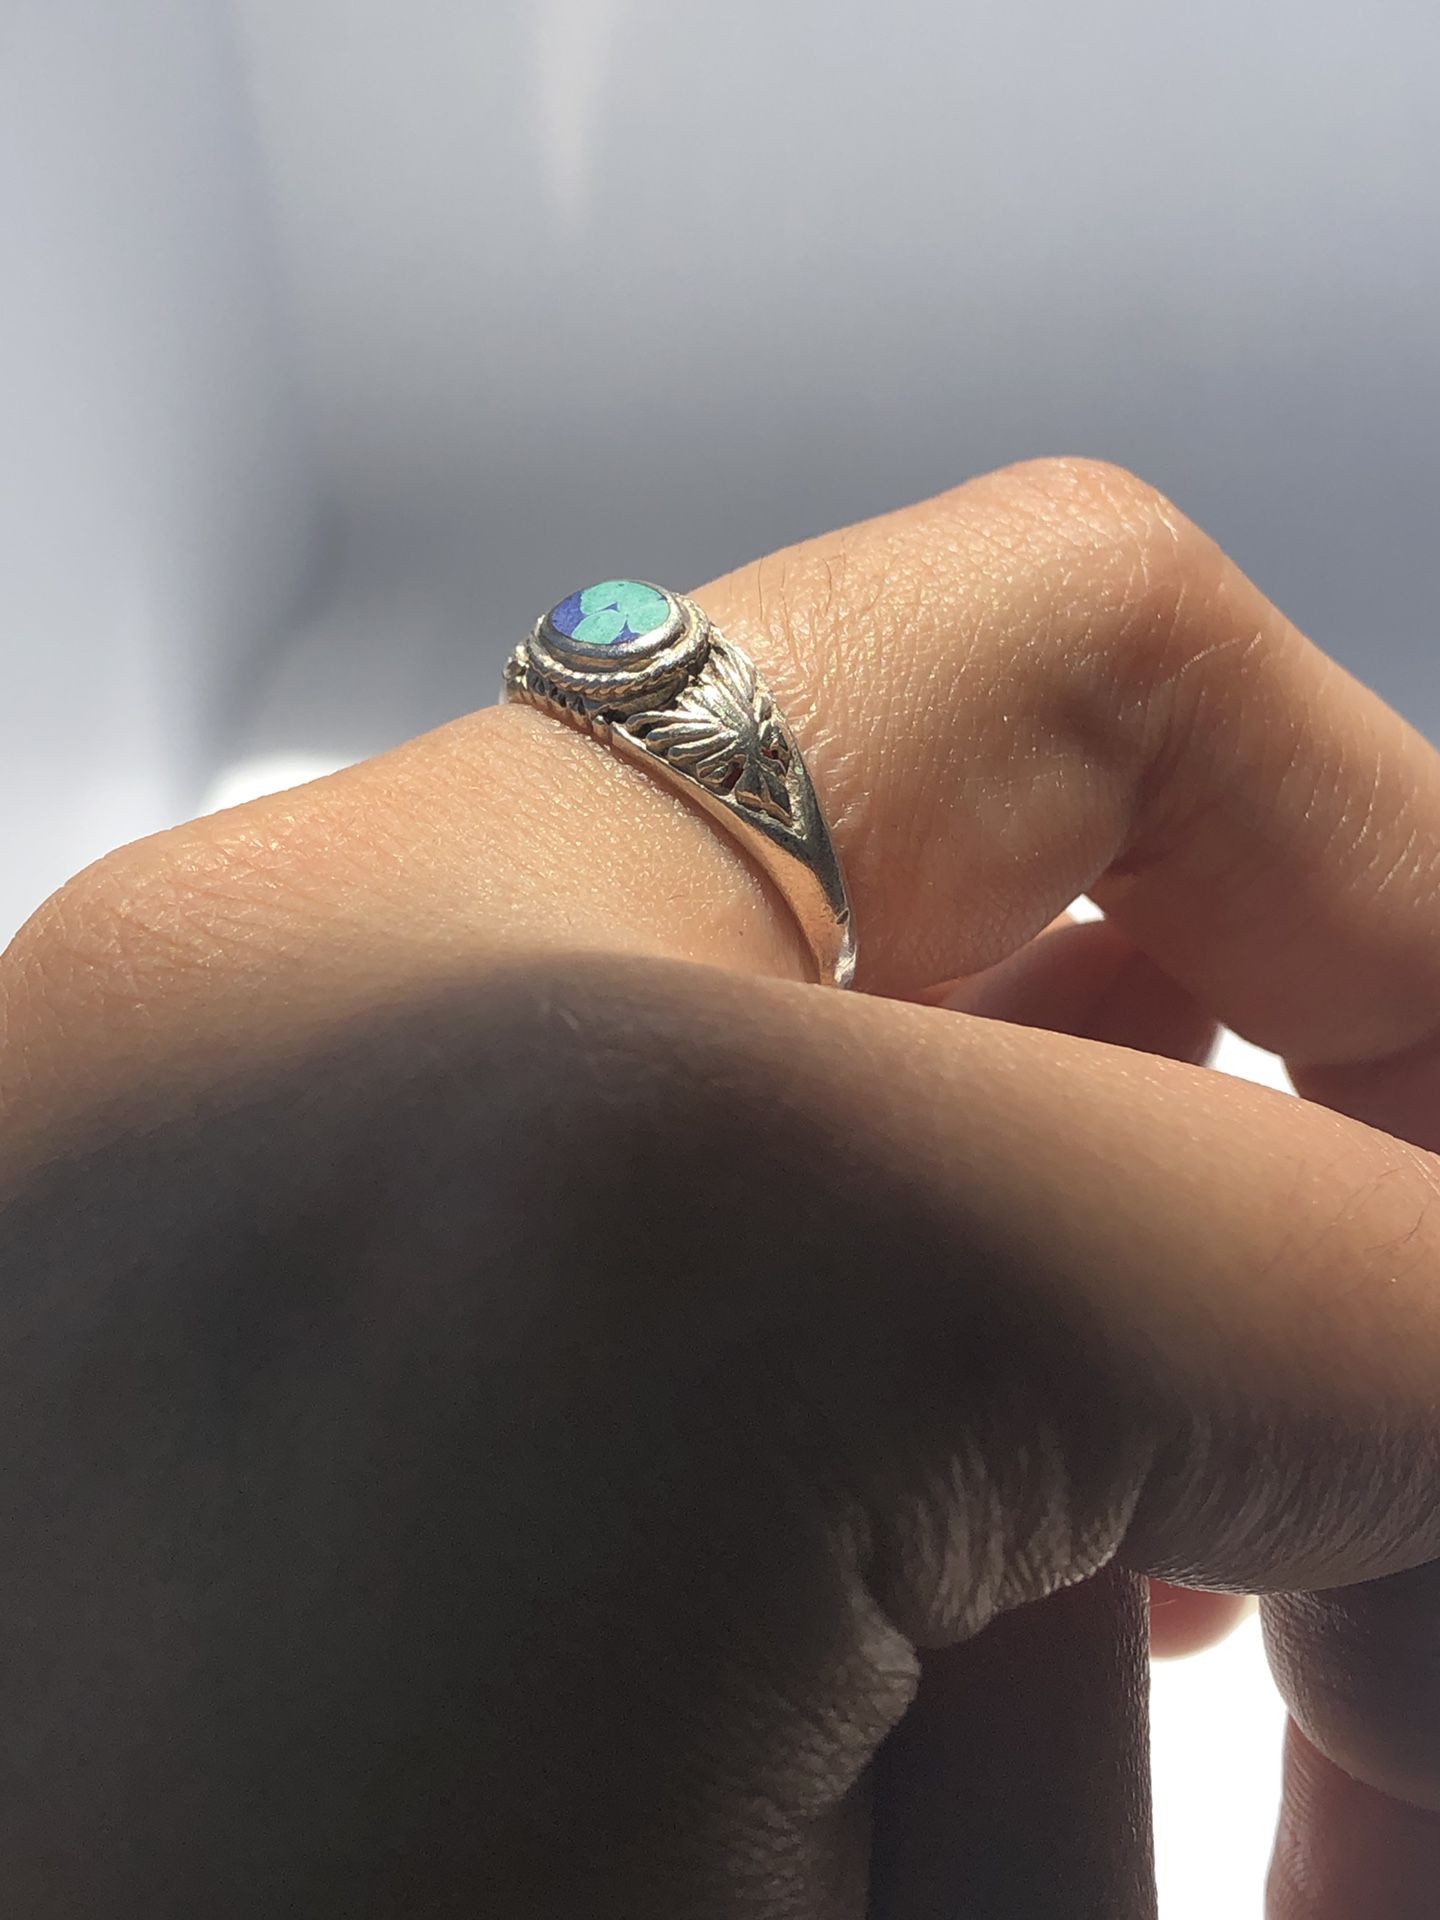 American native 925 sterling silver lapislázuli and turquoise ring